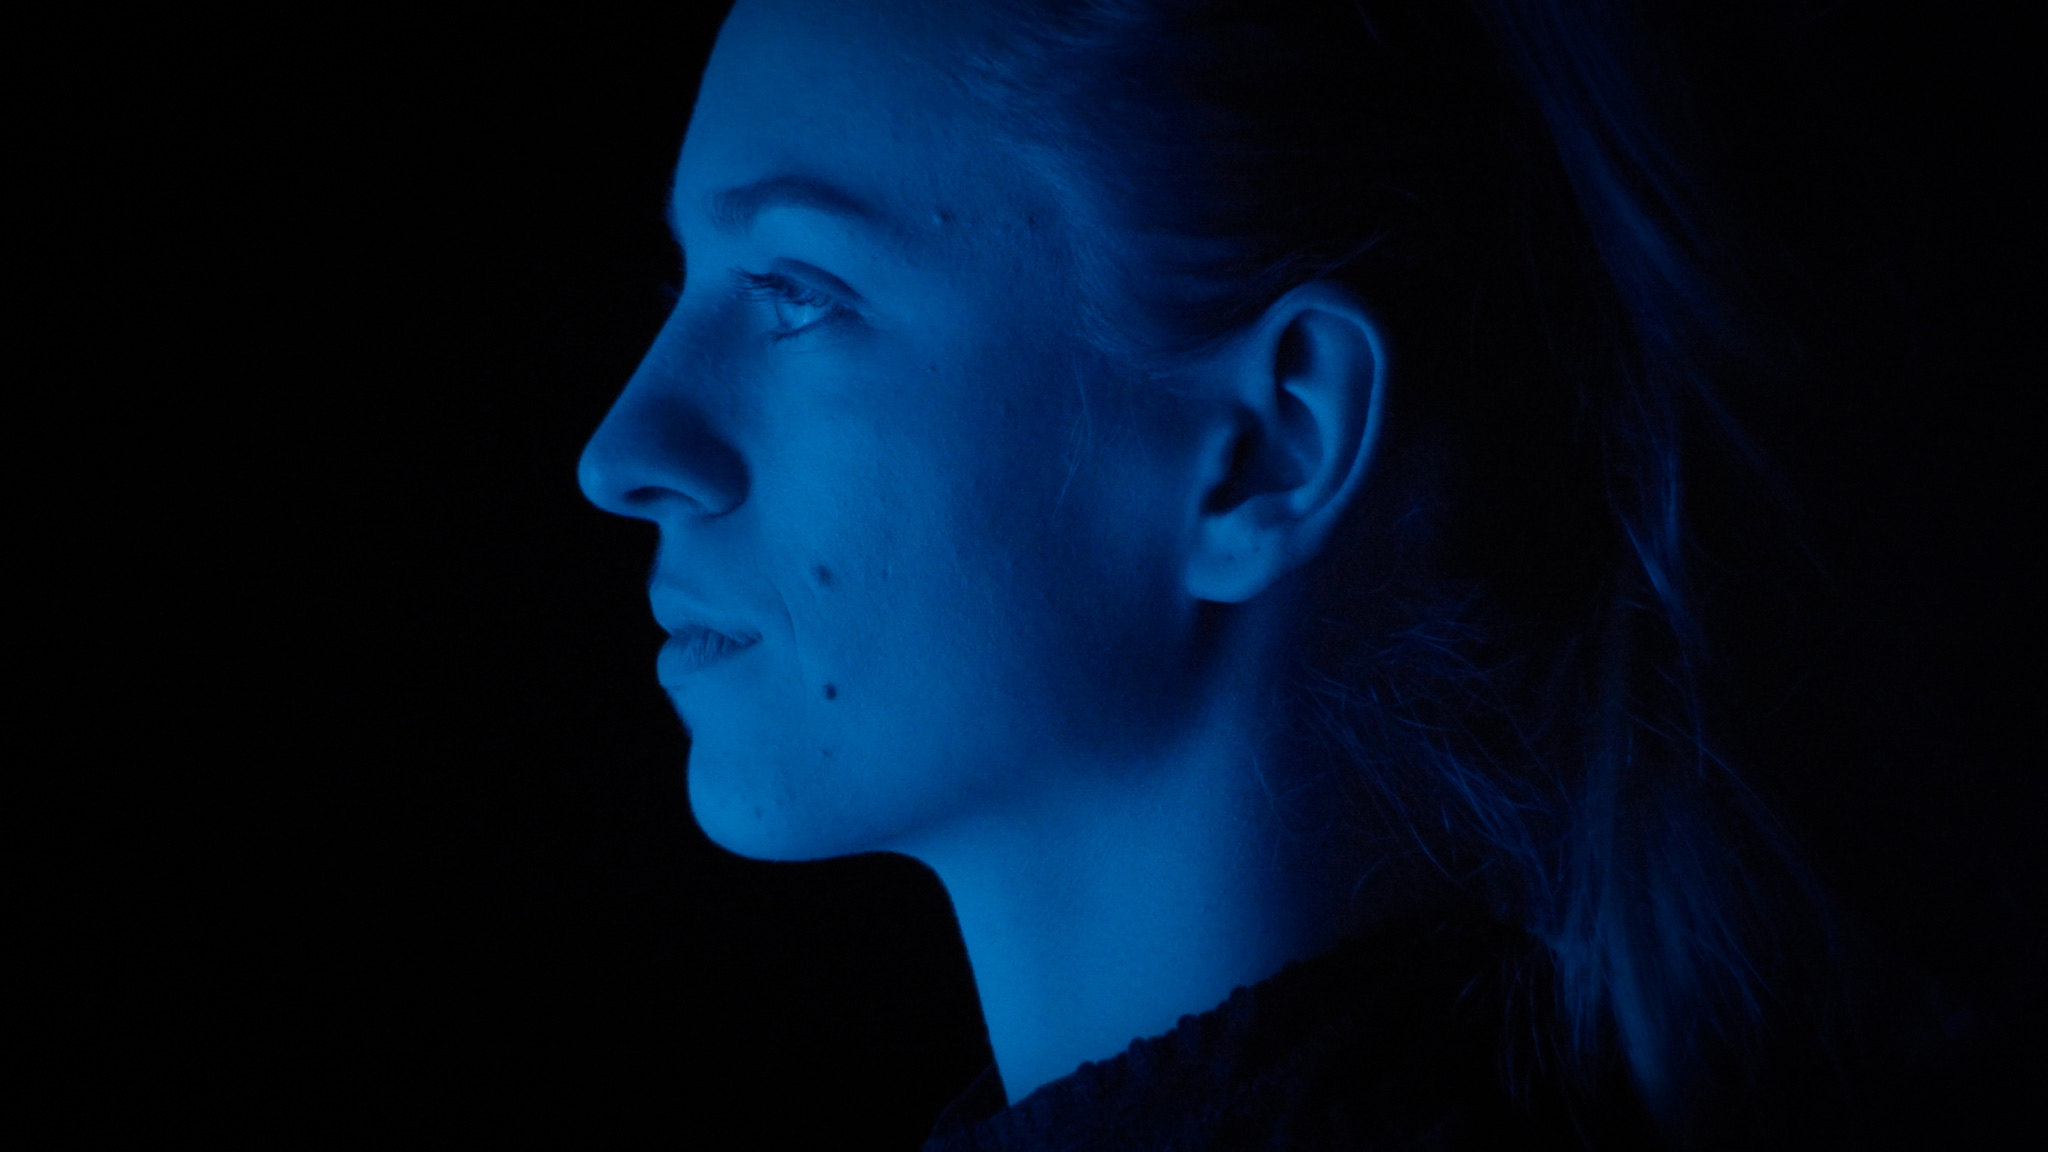 artifical picture from a girl in blue light